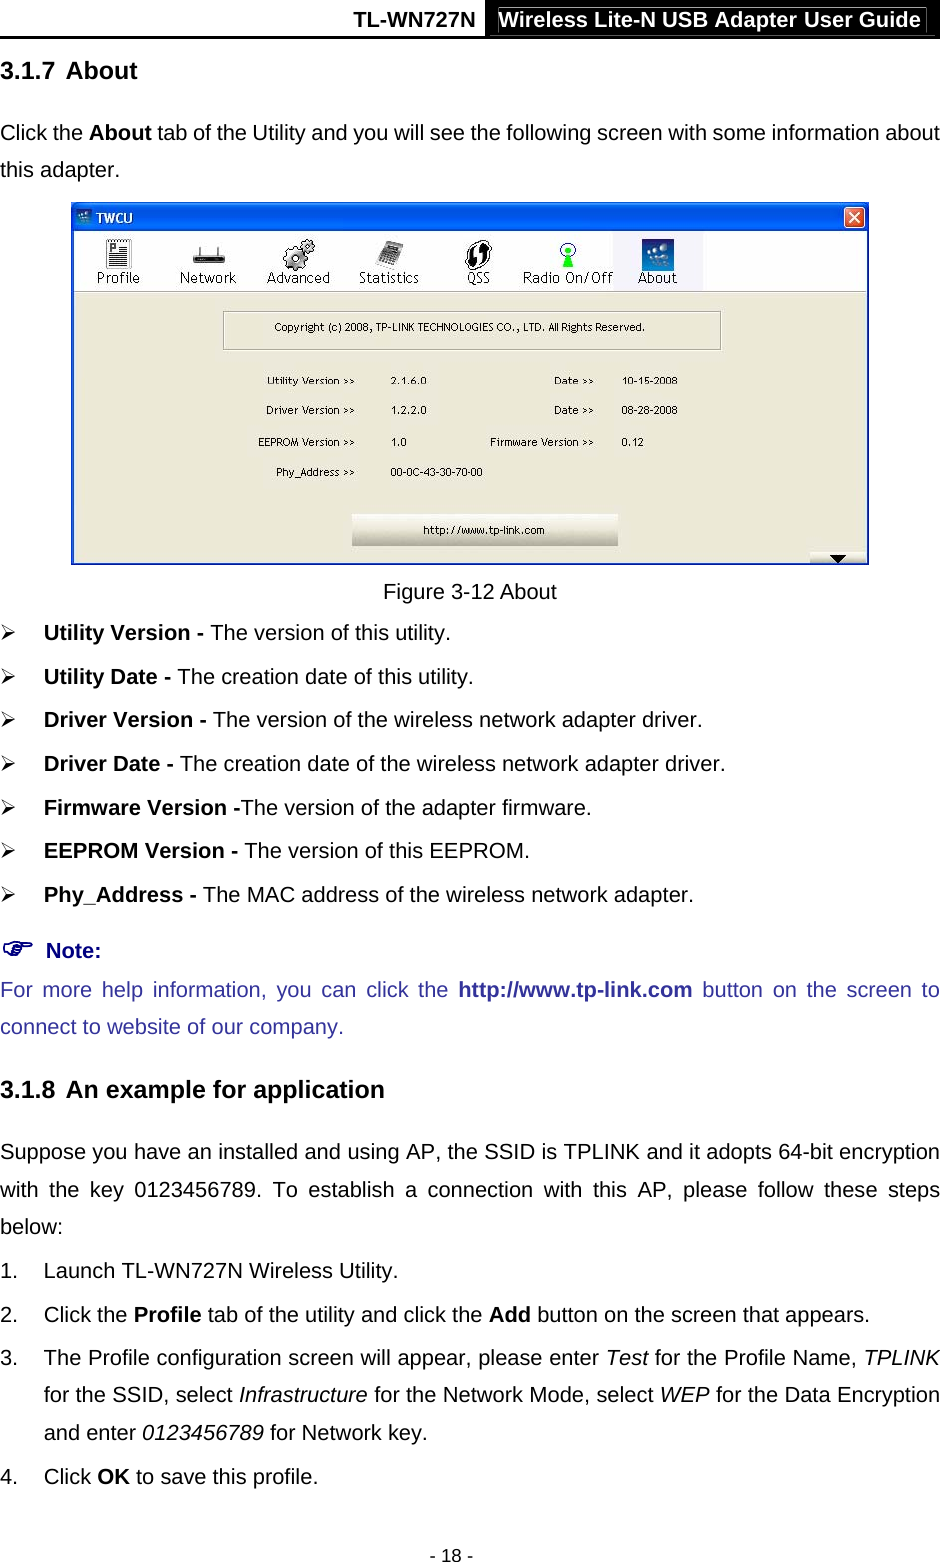 TL-WN727N Wireless Lite-N USB Adapter User Guide - 18 - 3.1.7 About Click the About tab of the Utility and you will see the following screen with some information about this adapter.    Figure 3-12 About ¾ Utility Version - The version of this utility. ¾ Utility Date - The creation date of this utility. ¾ Driver Version - The version of the wireless network adapter driver. ¾ Driver Date - The creation date of the wireless network adapter driver. ¾ Firmware Version -The version of the adapter firmware.   ¾ EEPROM Version - The version of this EEPROM. ¾ Phy_Address - The MAC address of the wireless network adapter. ) Note:   For more help information, you can click the http://www.tp-link.com button on the screen to connect to website of our company. 3.1.8 An example for application Suppose you have an installed and using AP, the SSID is TPLINK and it adopts 64-bit encryption with the key 0123456789. To establish a connection with this AP, please follow these steps below: 1.  Launch TL-WN727N Wireless Utility. 2. Click the Profile tab of the utility and click the Add button on the screen that appears. 3.  The Profile configuration screen will appear, please enter Test for the Profile Name, TPLINK for the SSID, select Infrastructure for the Network Mode, select WEP for the Data Encryption and enter 0123456789 for Network key. 4. Click OK to save this profile. 